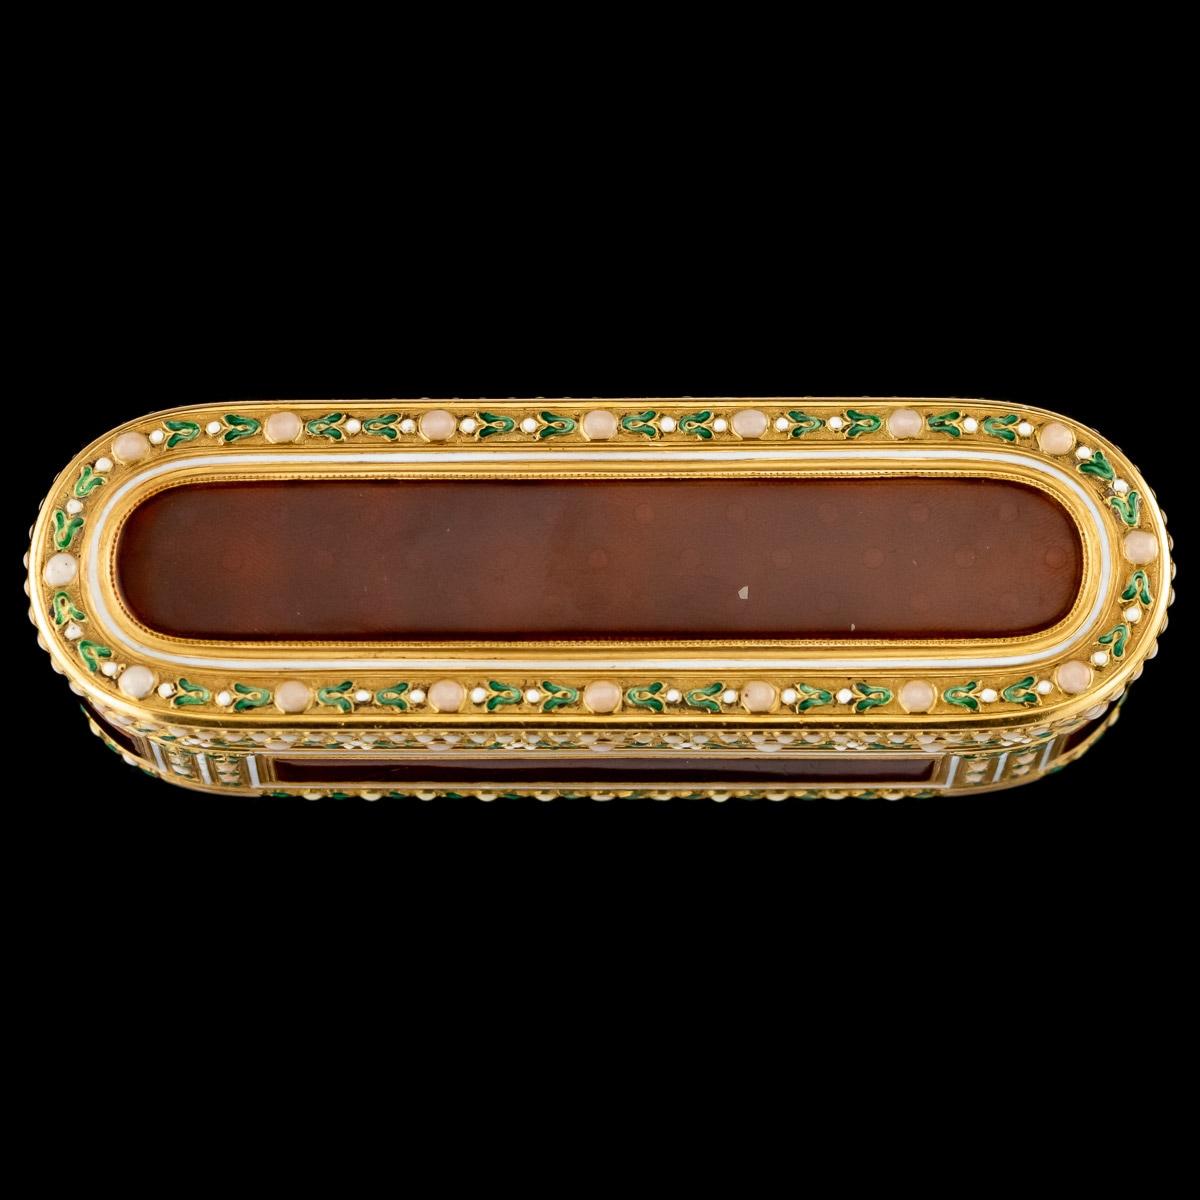 Antique late 18th century French 18-karat gold and enamel snuff box, of oblong shape, lid, sides and base applied with translucent red or amber enamel panels over a spot and wavy engine-turned ground, the borders chased and enameled with simulated